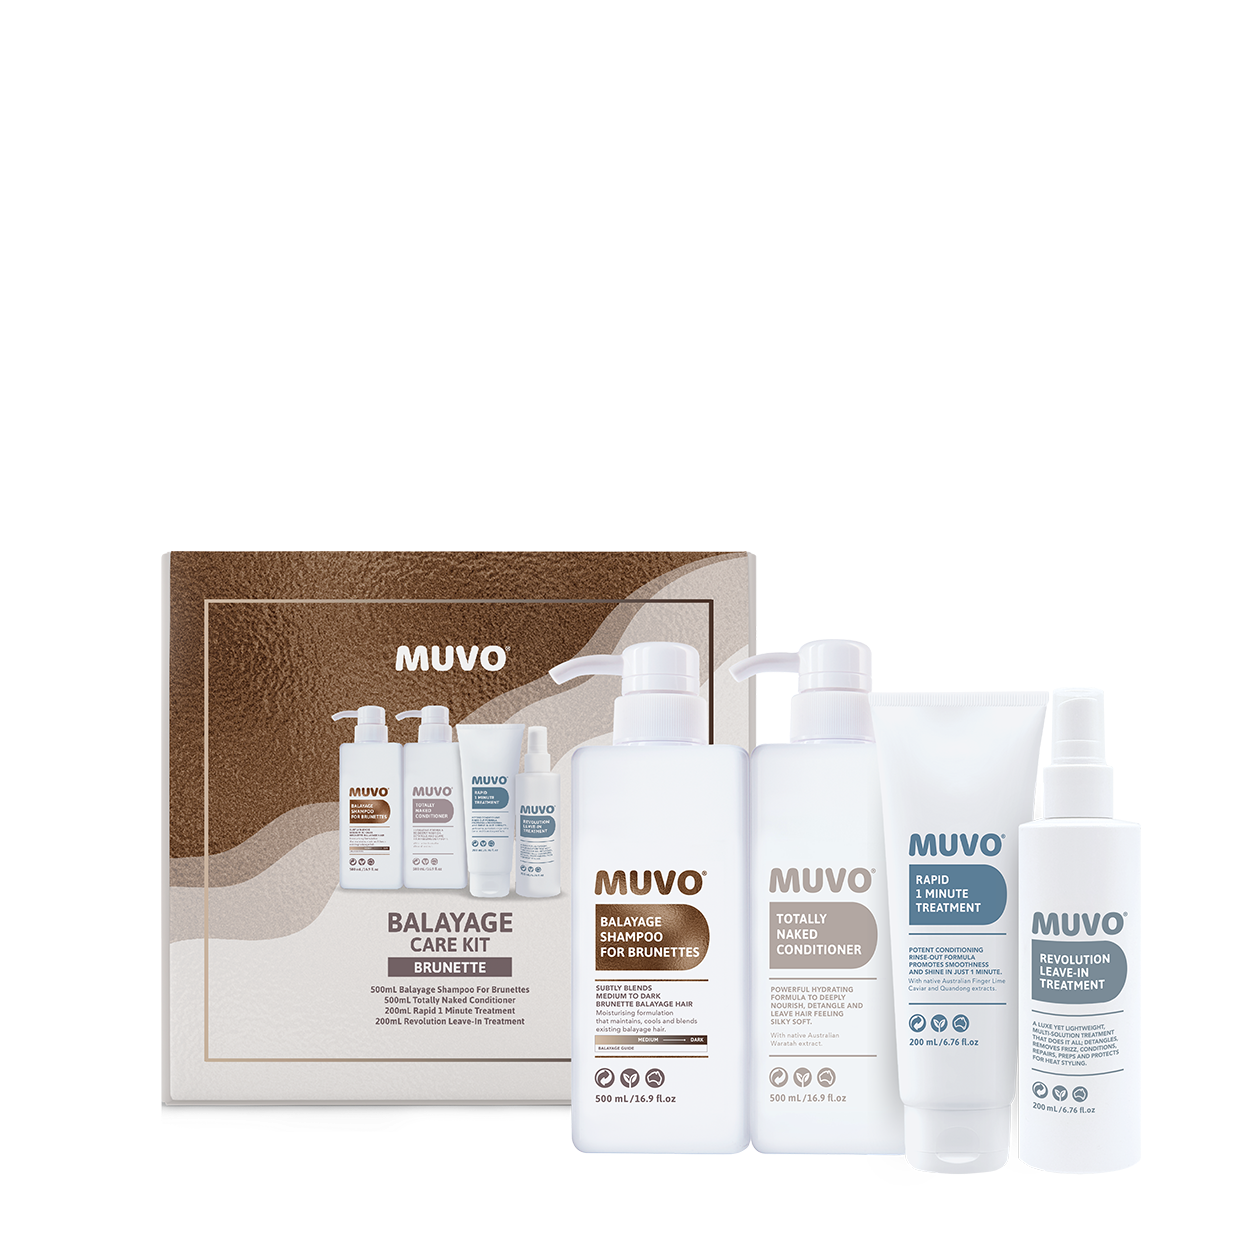 MUVO Balayage Care Kit For Brunettes [DEL]